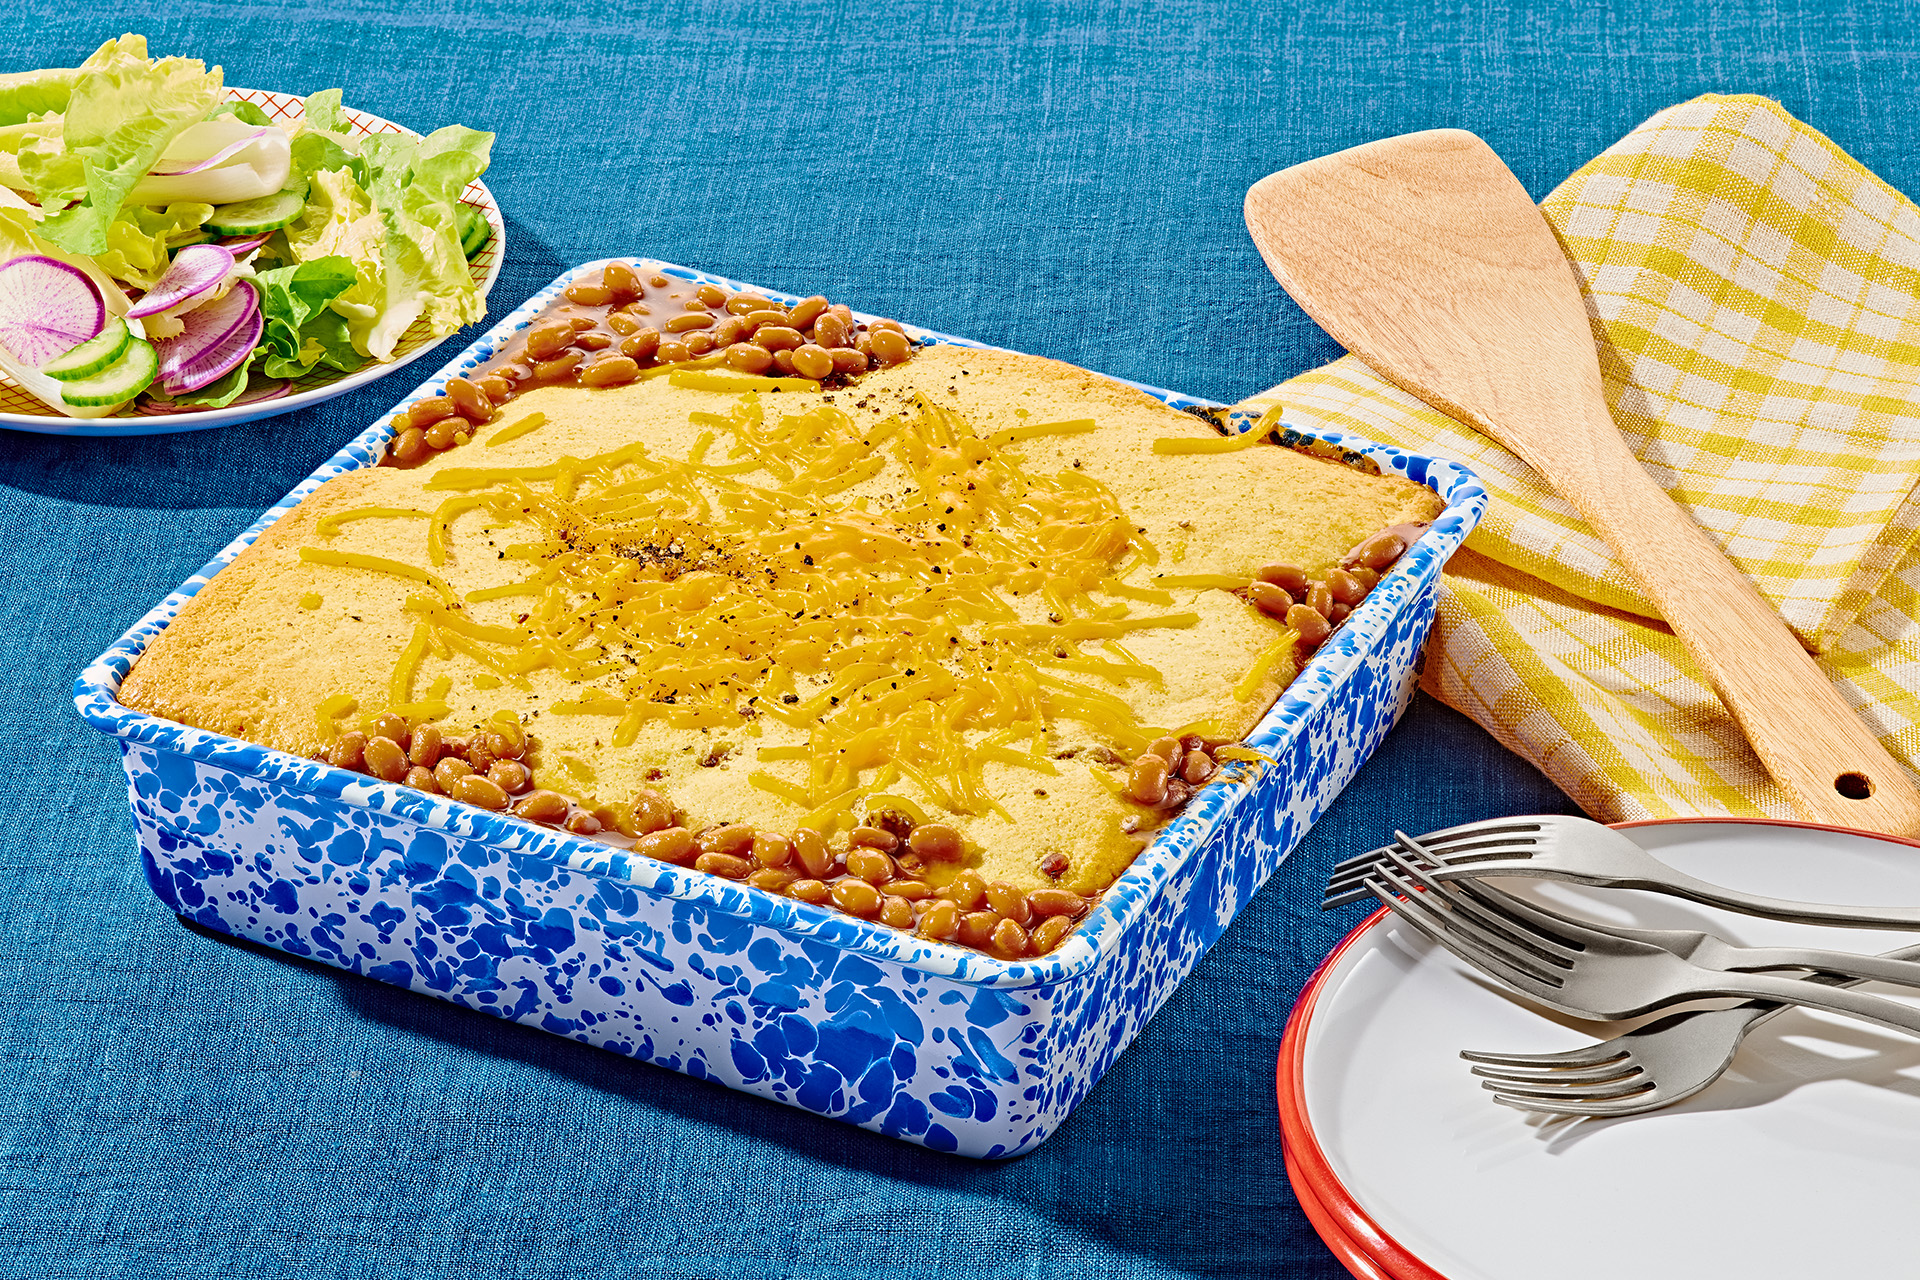 Baked bean, beef and cornbread casserole topped with melted cheese in square blue and white patterned baking dish